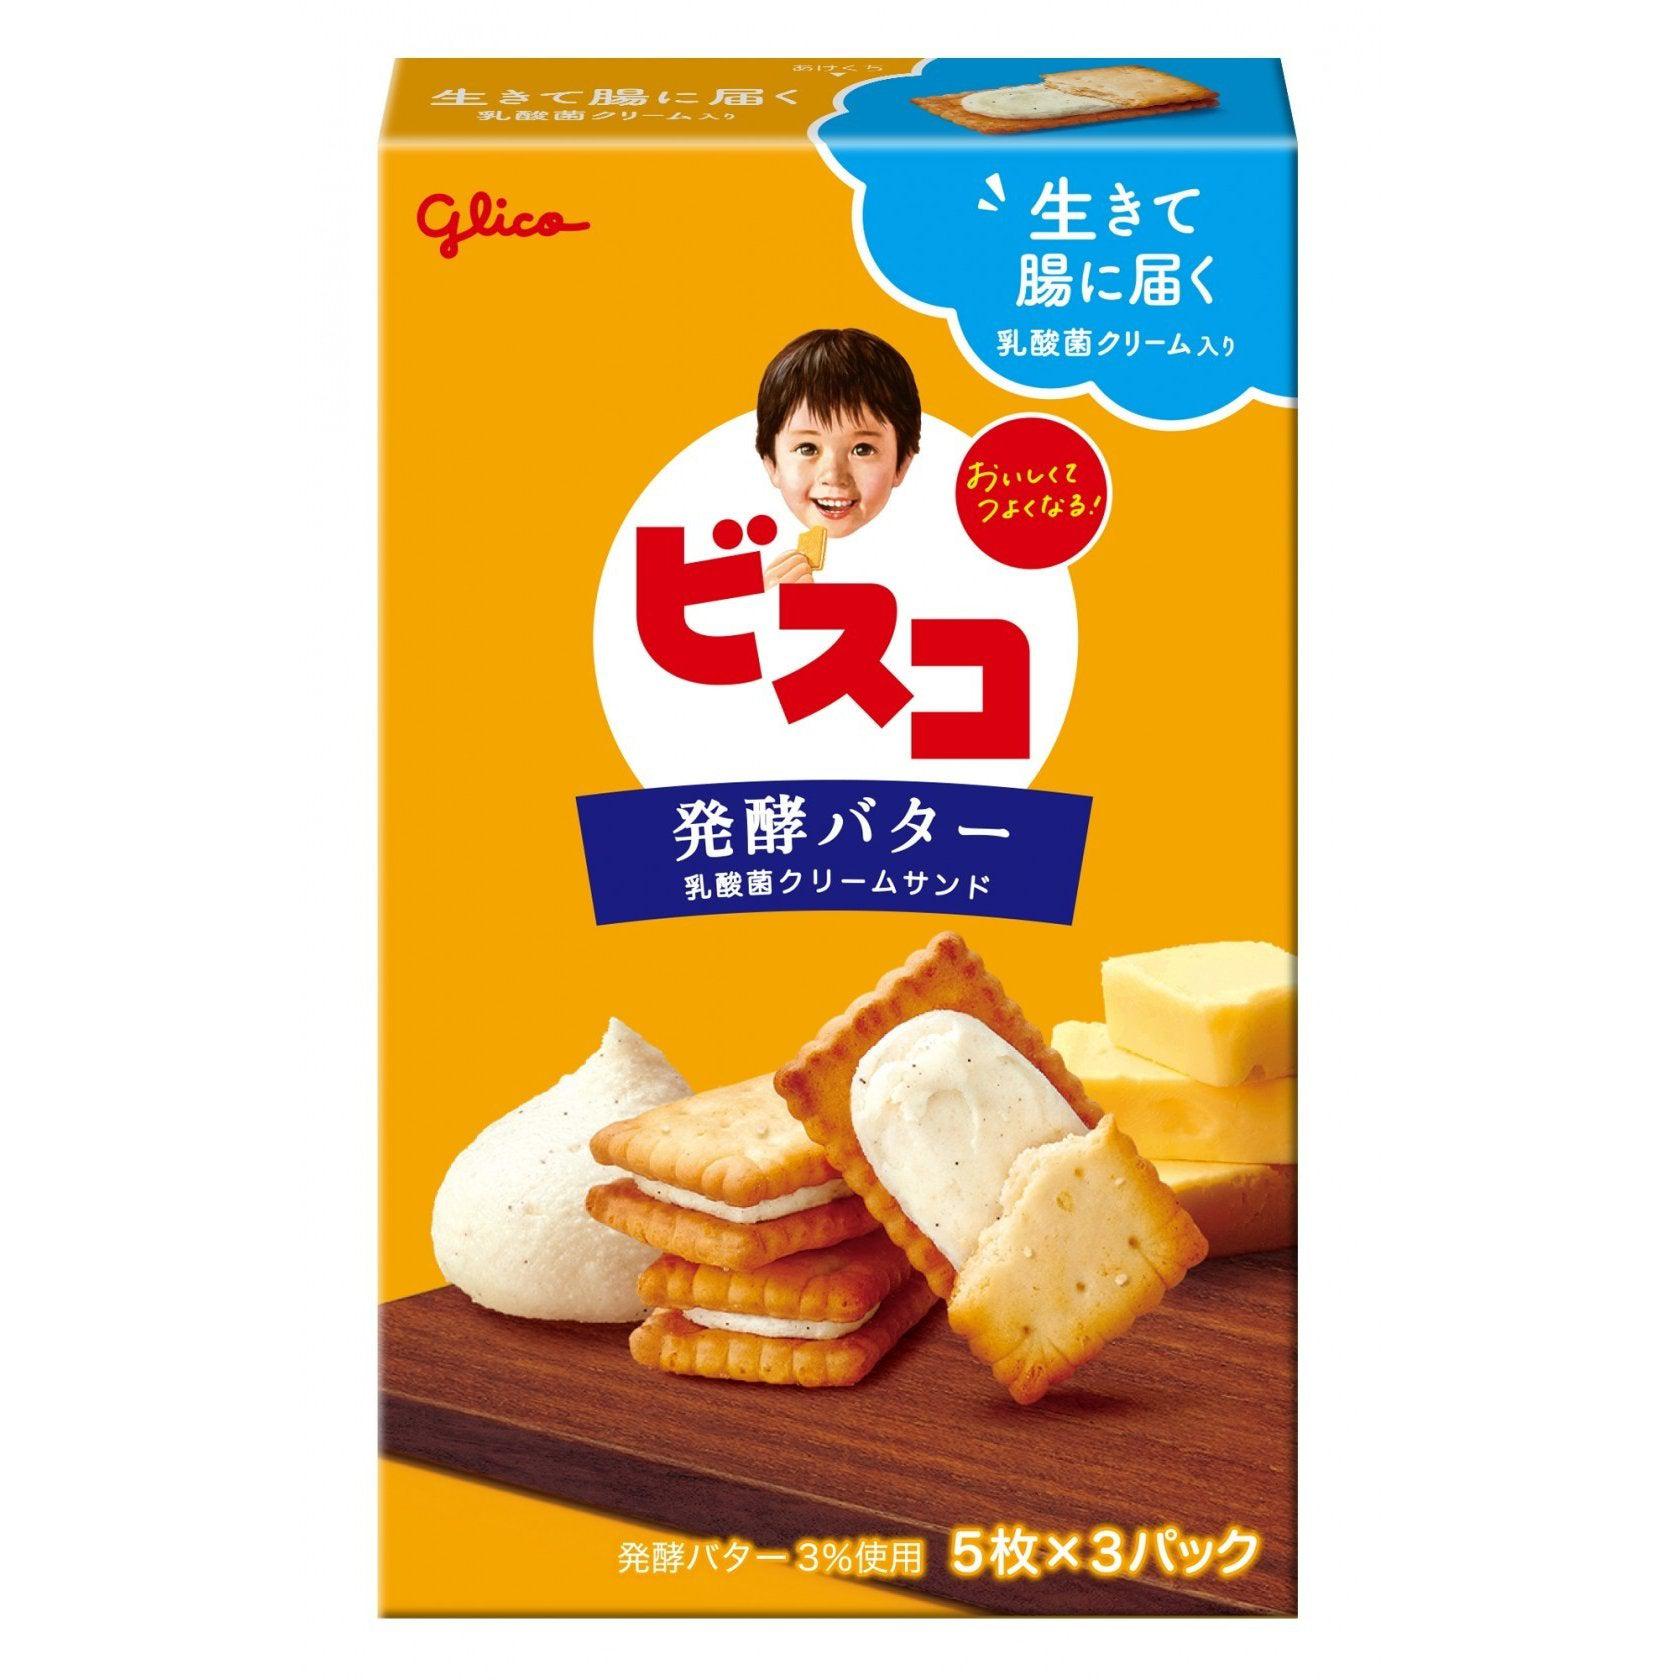 Glico Bisco Rich Butter Cream Sandwich Biscuits 15 Pieces (Pack of 5)